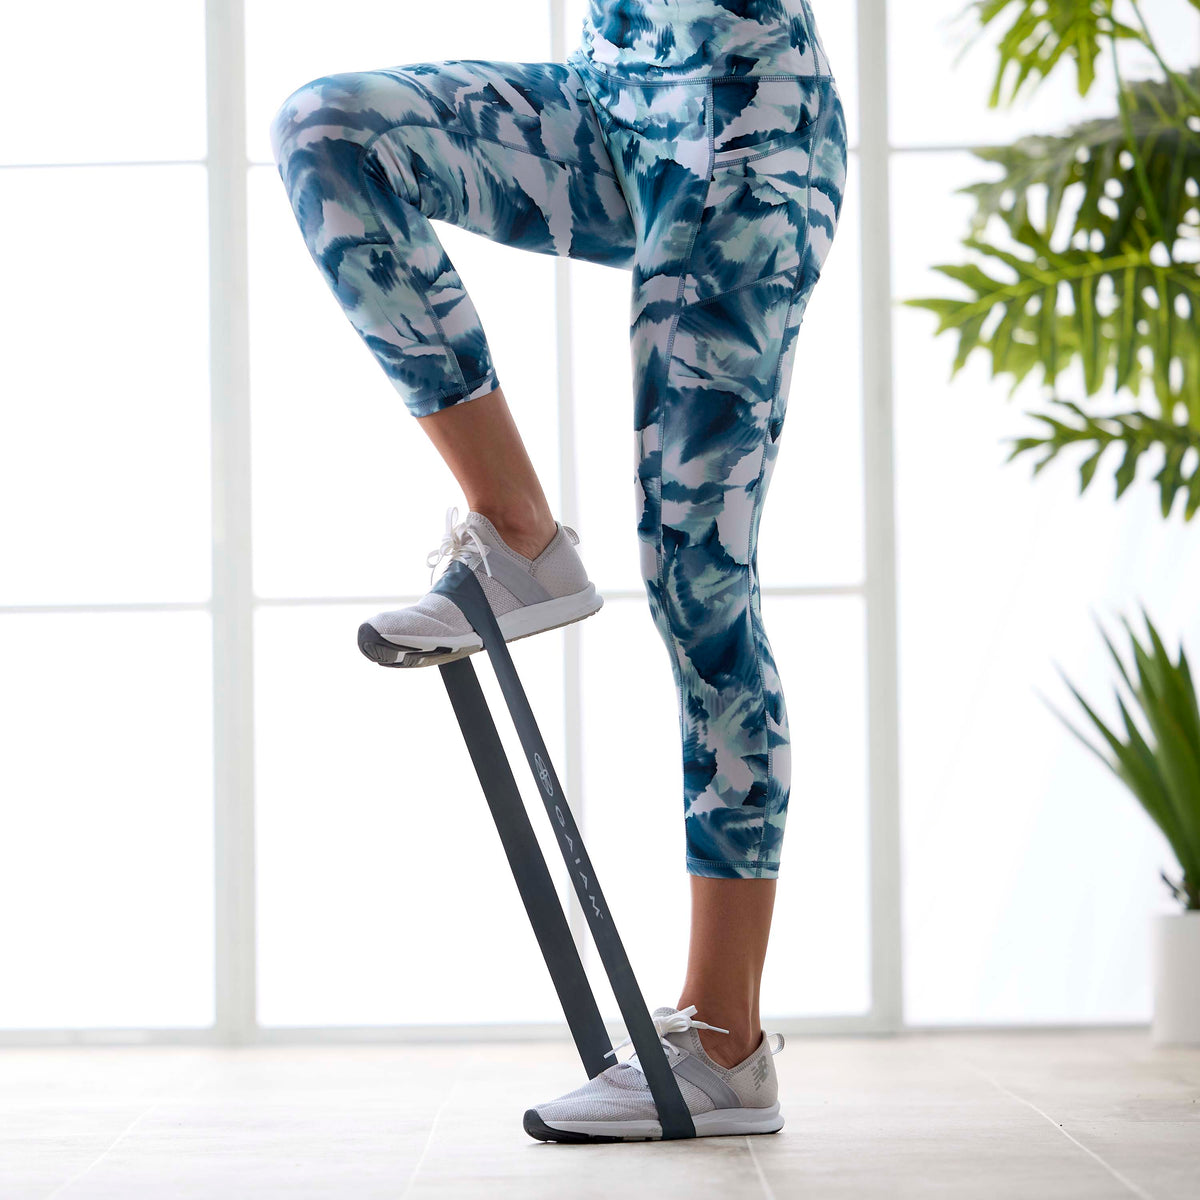 Up close image of person doing a high step with a Restore Mini Band under the foot that is on the ground as well as the foot that is in the high step.